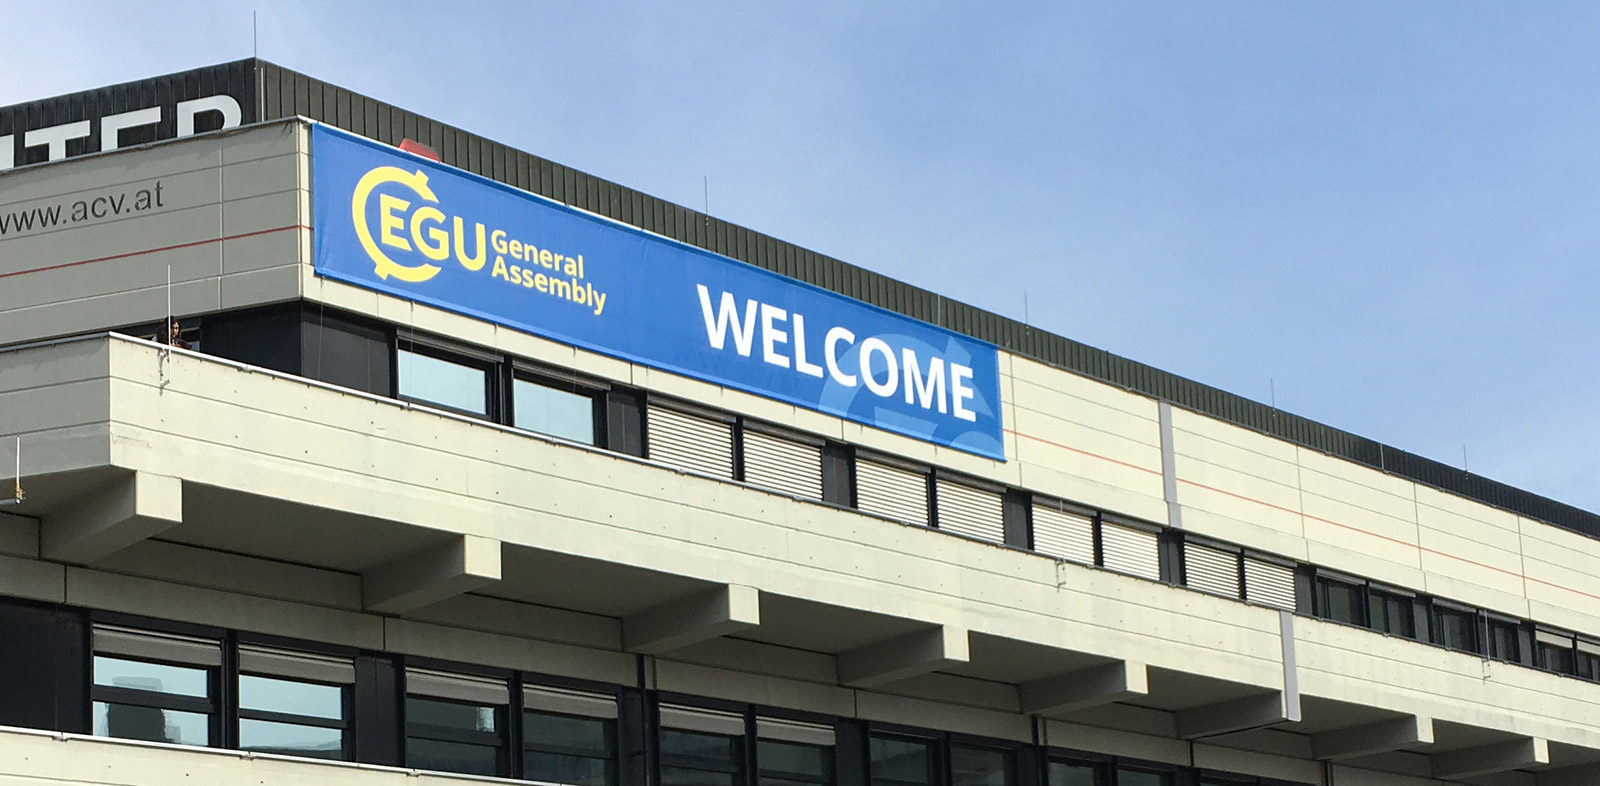 EGU welcome banner on building